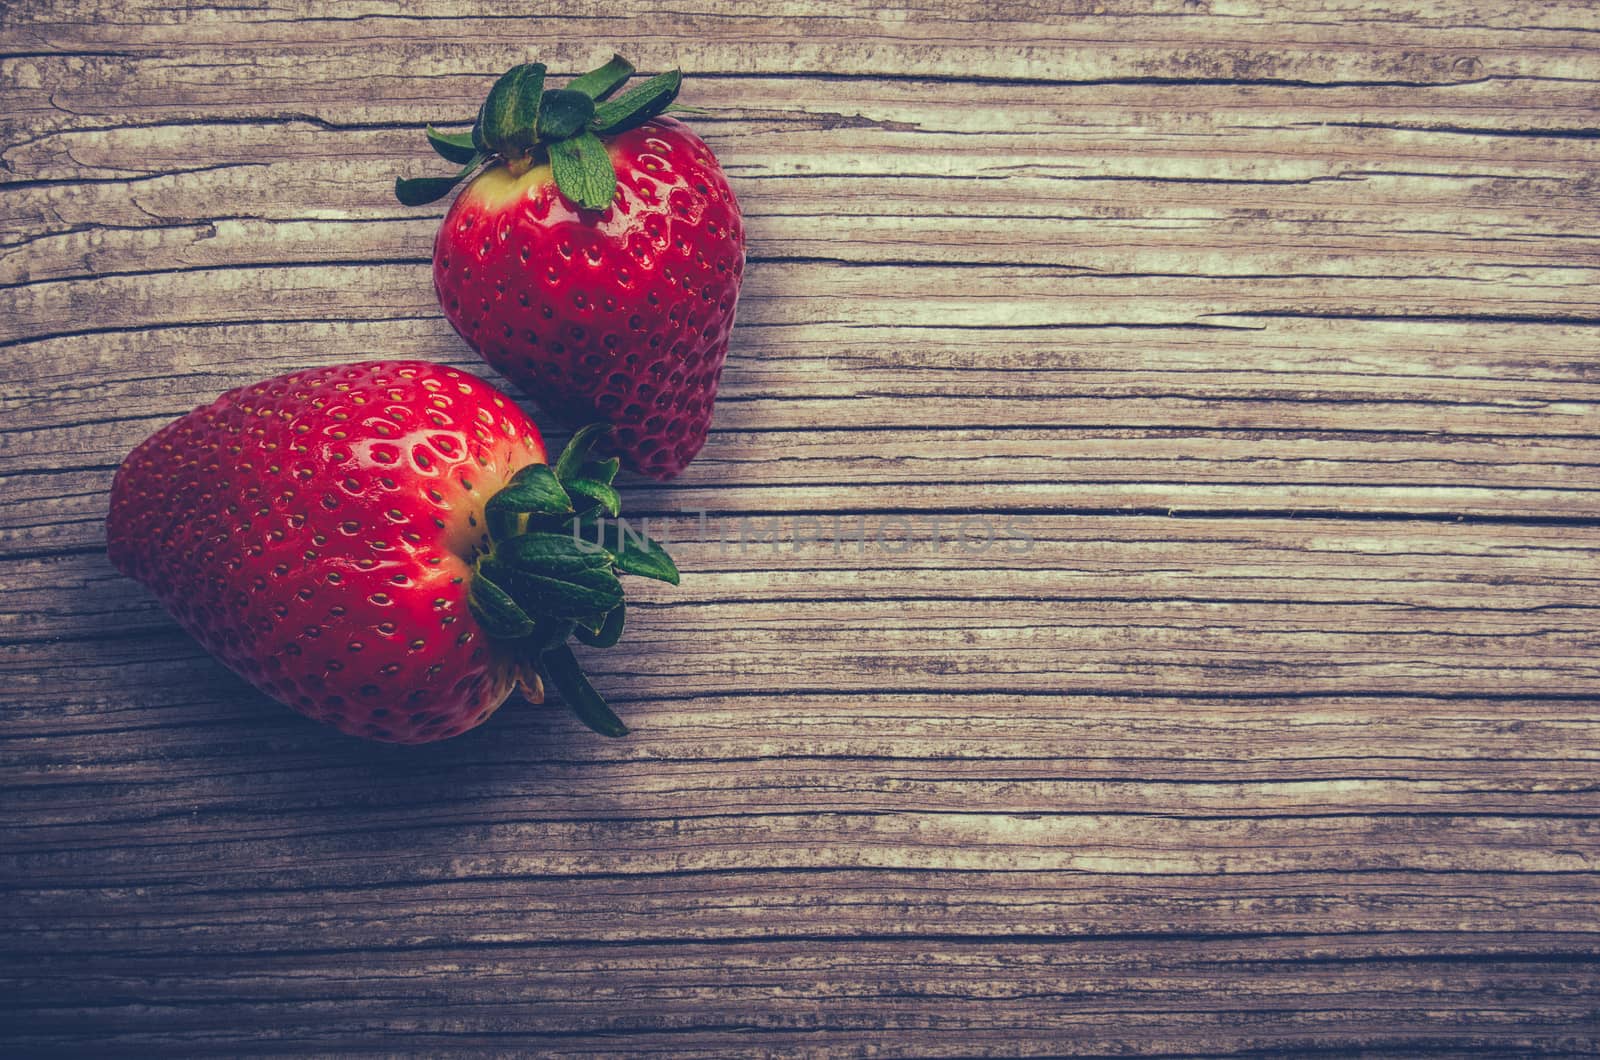 Fresh Strawberries On A Wooden Table by mrdoomits